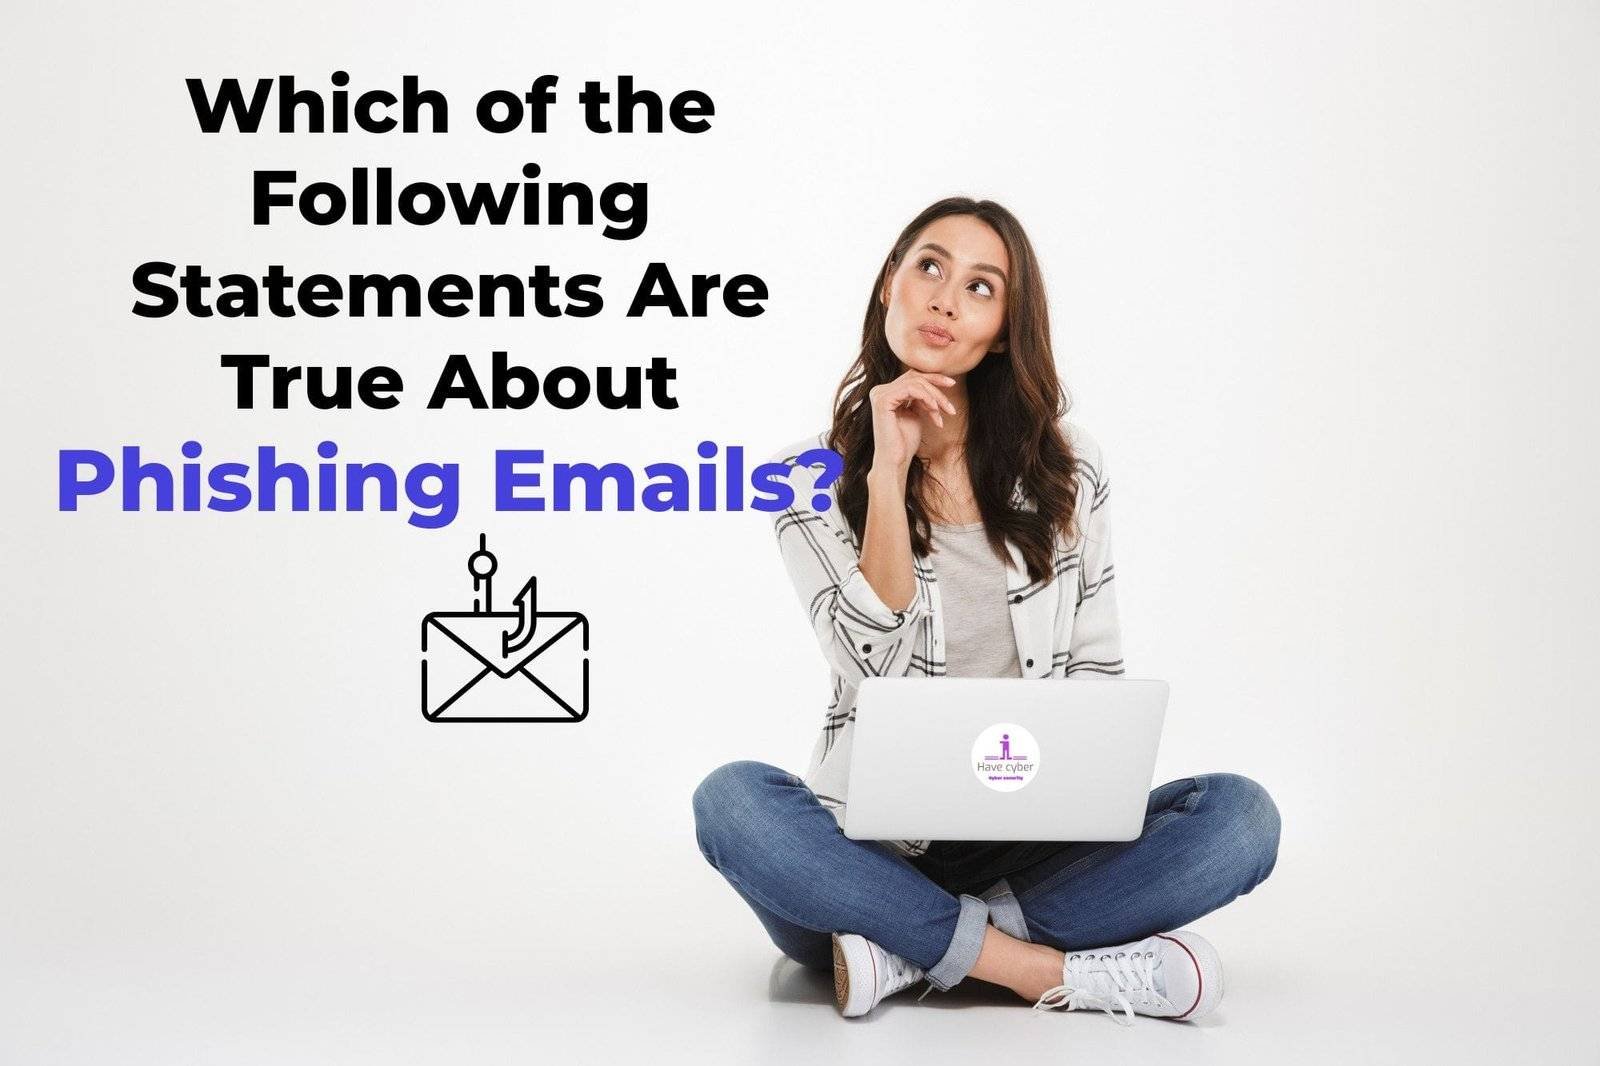 which of the following statements are true about phishing emails